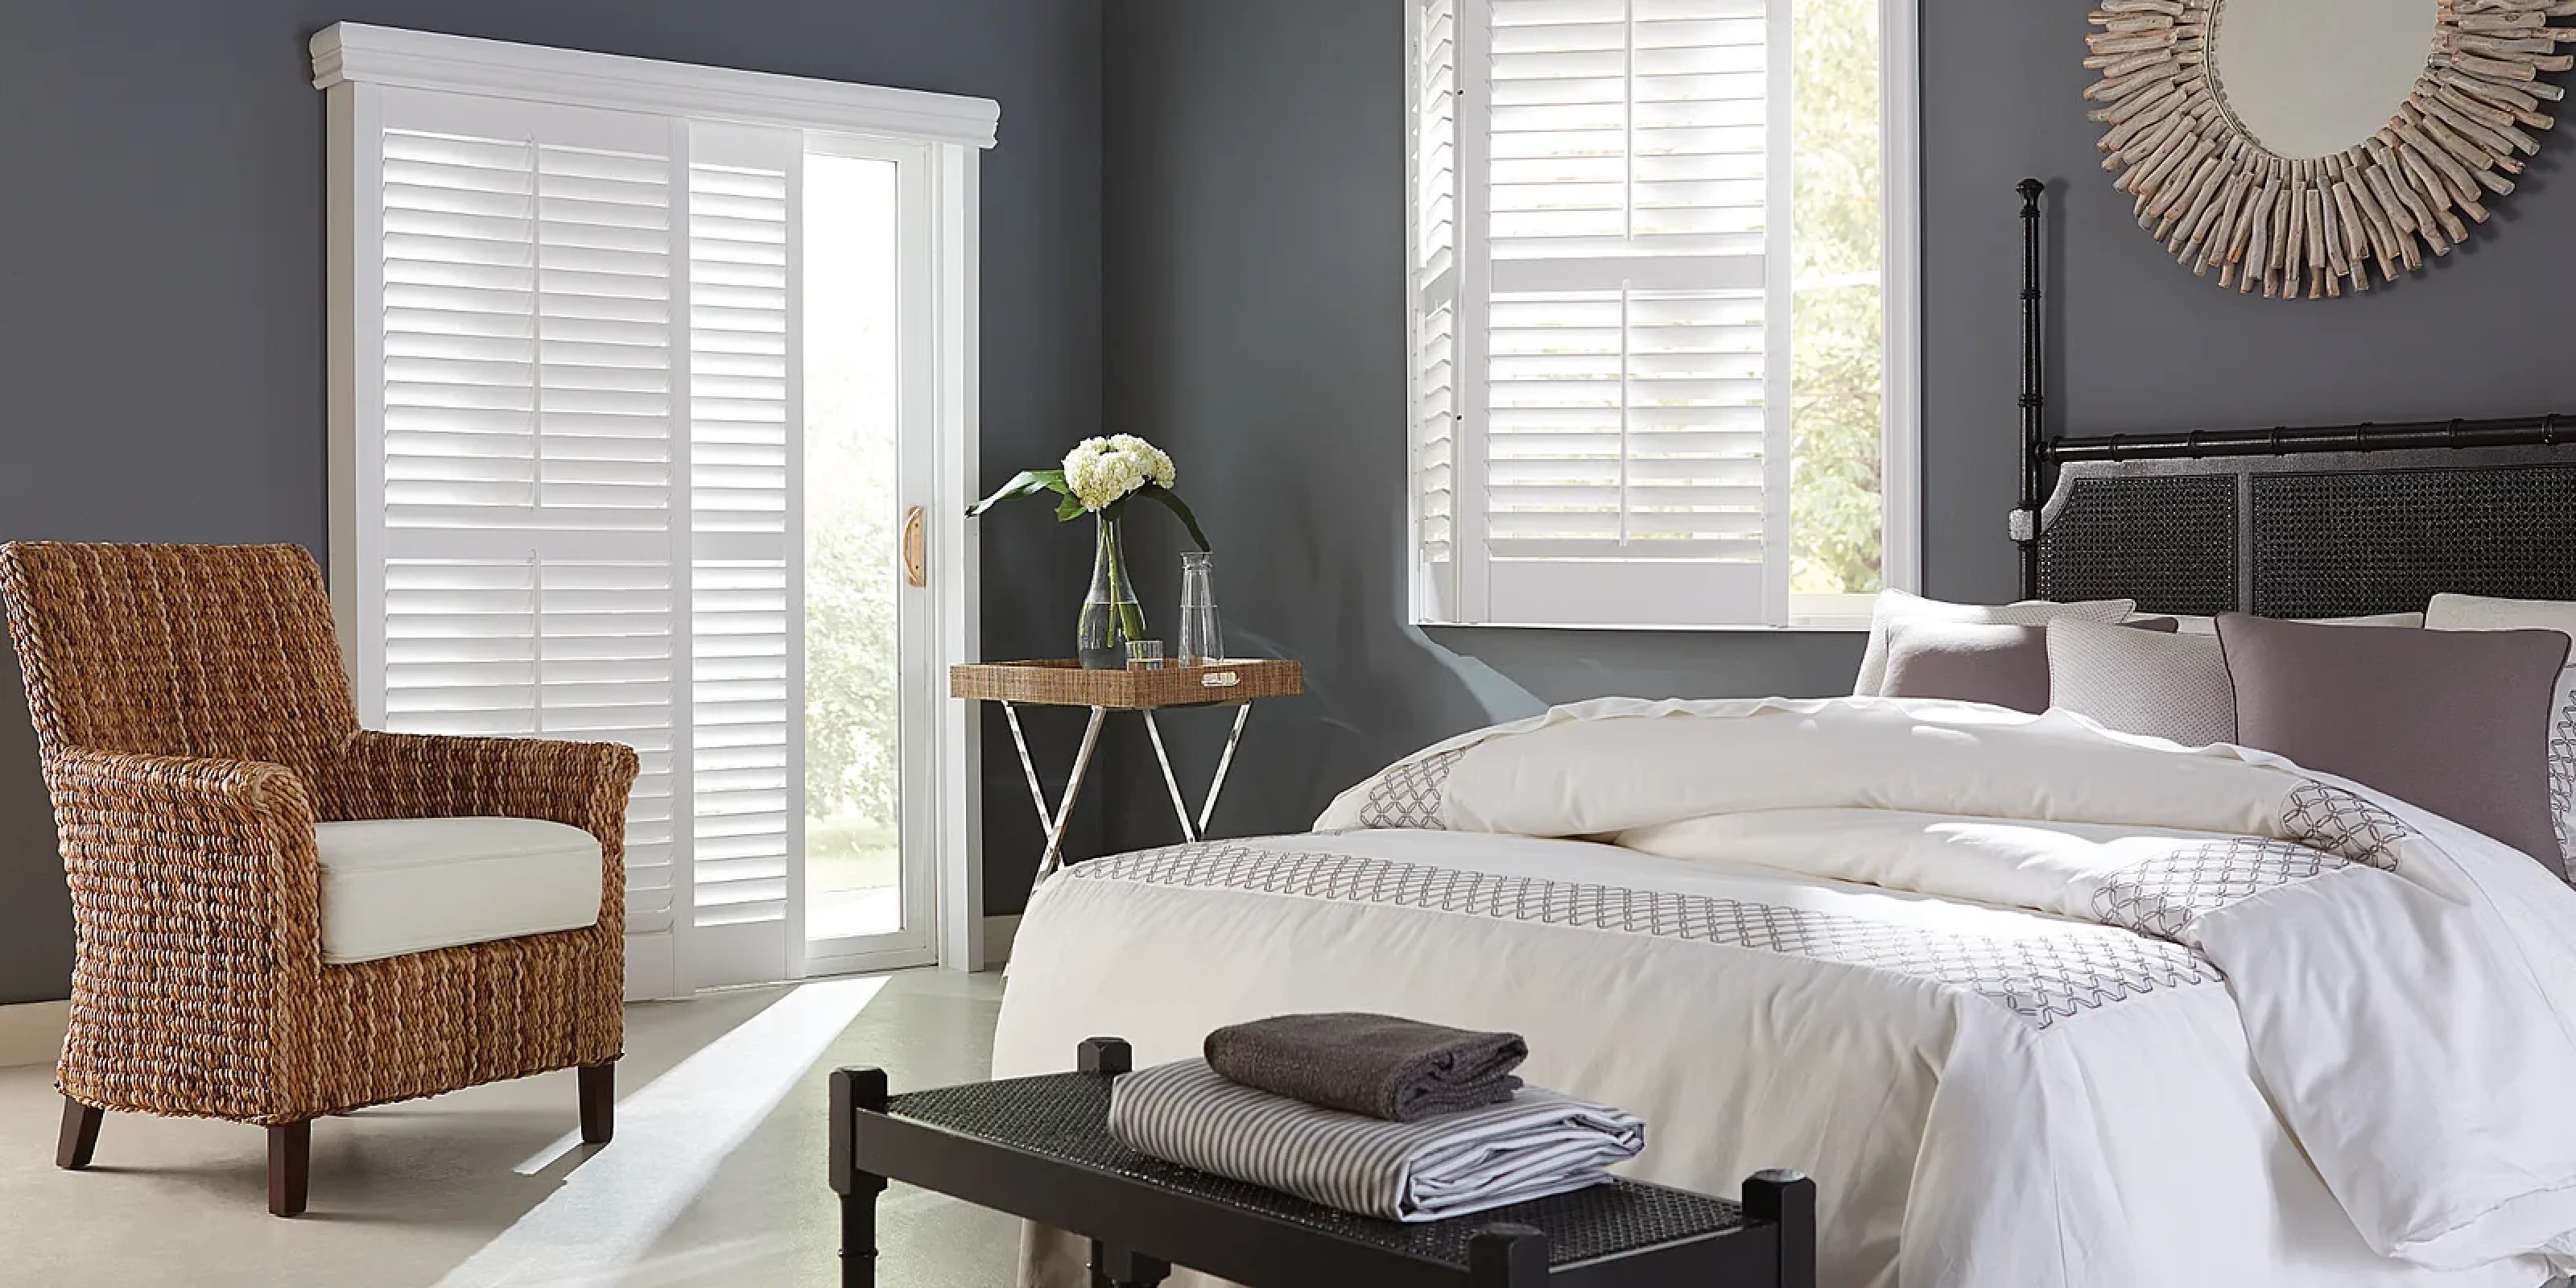 Bedroom interior with shutters